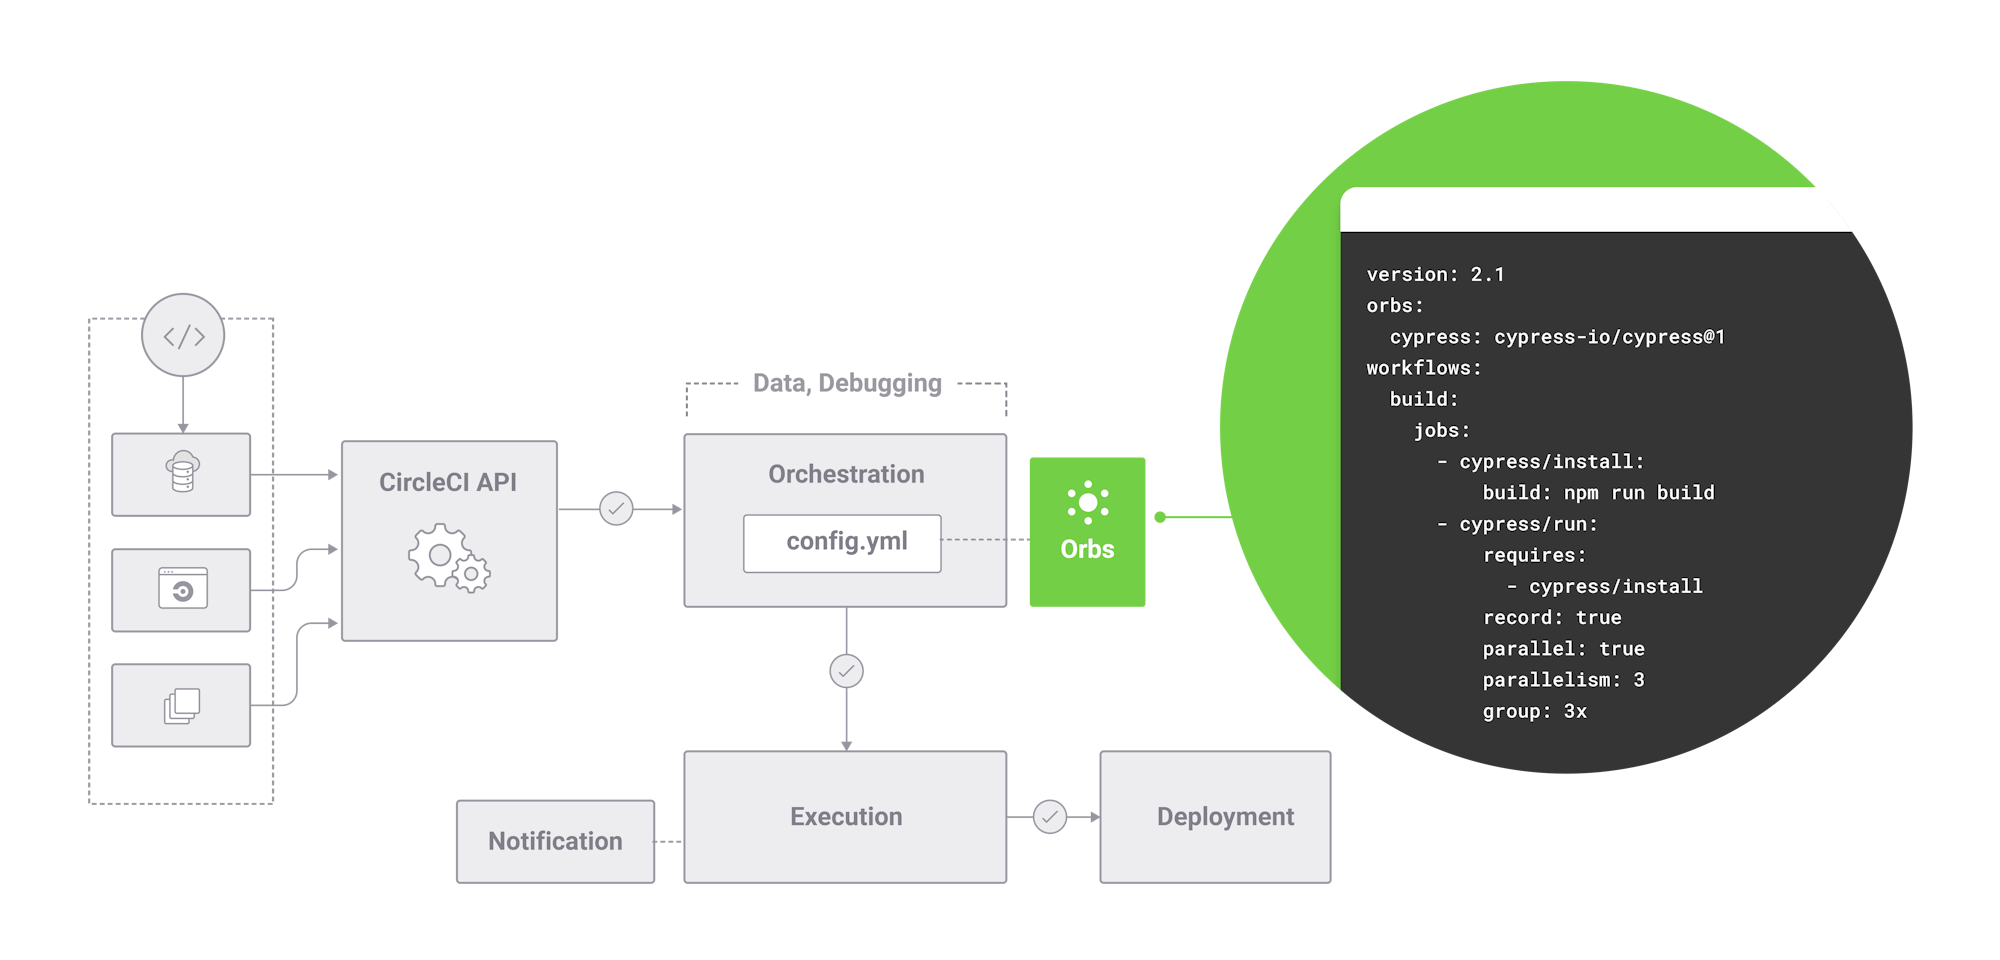 Image of how CircleCI works. CircleCI’s orchestration server processes builds based on the YAML file, which contains a Cypress orb that resolves during runtime. Using instructions from the Cypress orb, CircleCI builds an app on Cypress.